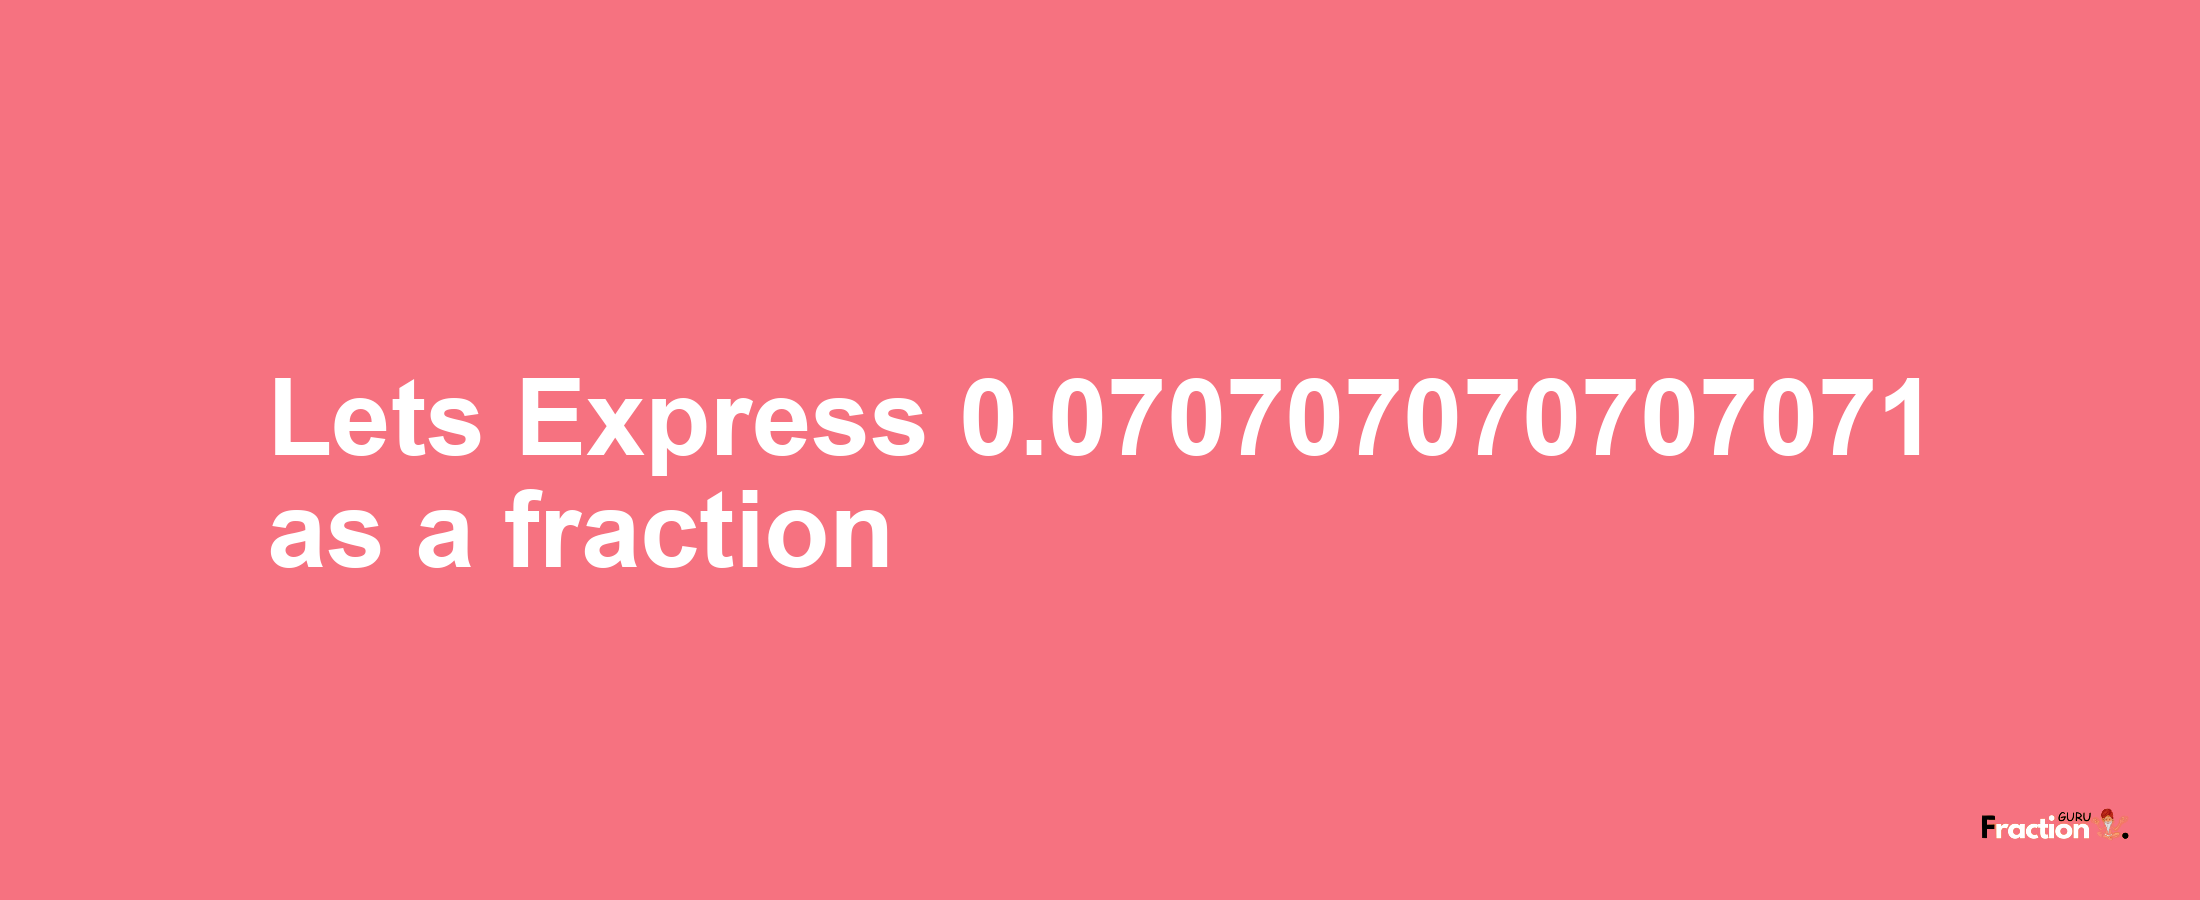 Lets Express 0.070707070707071 as afraction